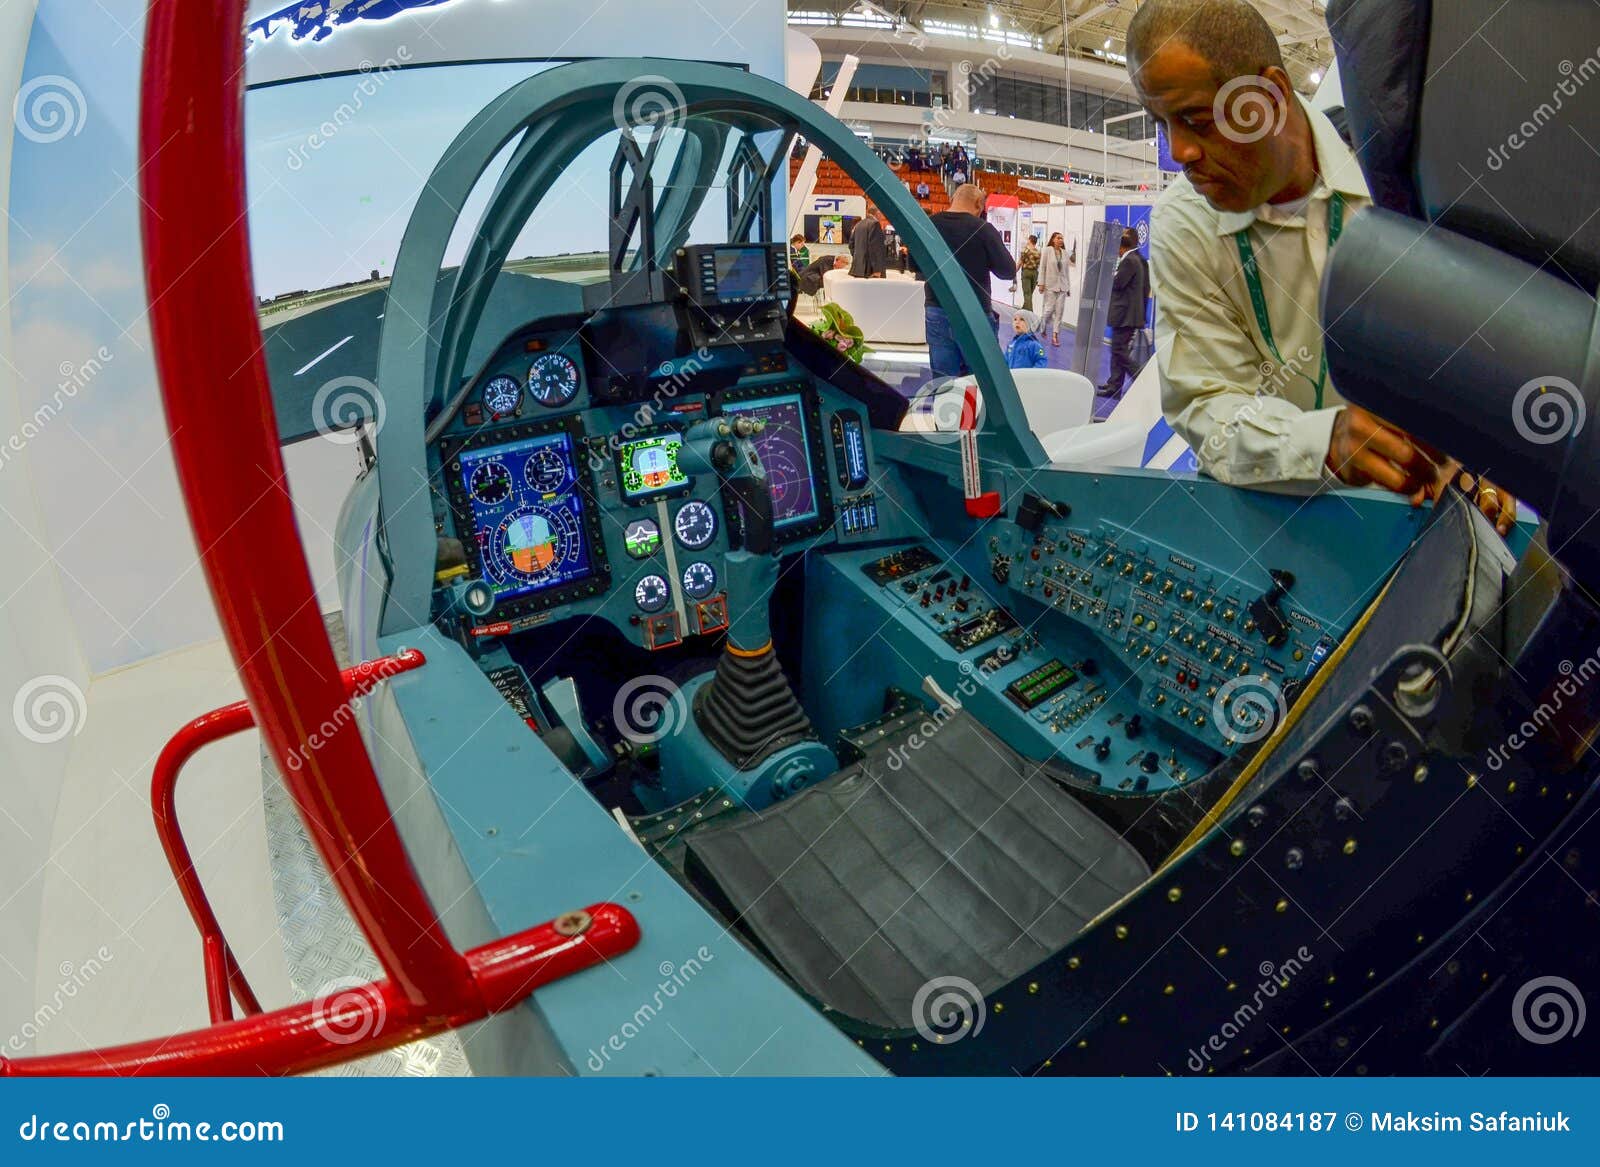 MILEX International Exhibition of Arms and Military Equipment: the Cockpit  of the Modernized Su-25 Editorial Photography - Image of materiel,  interior: 141084187